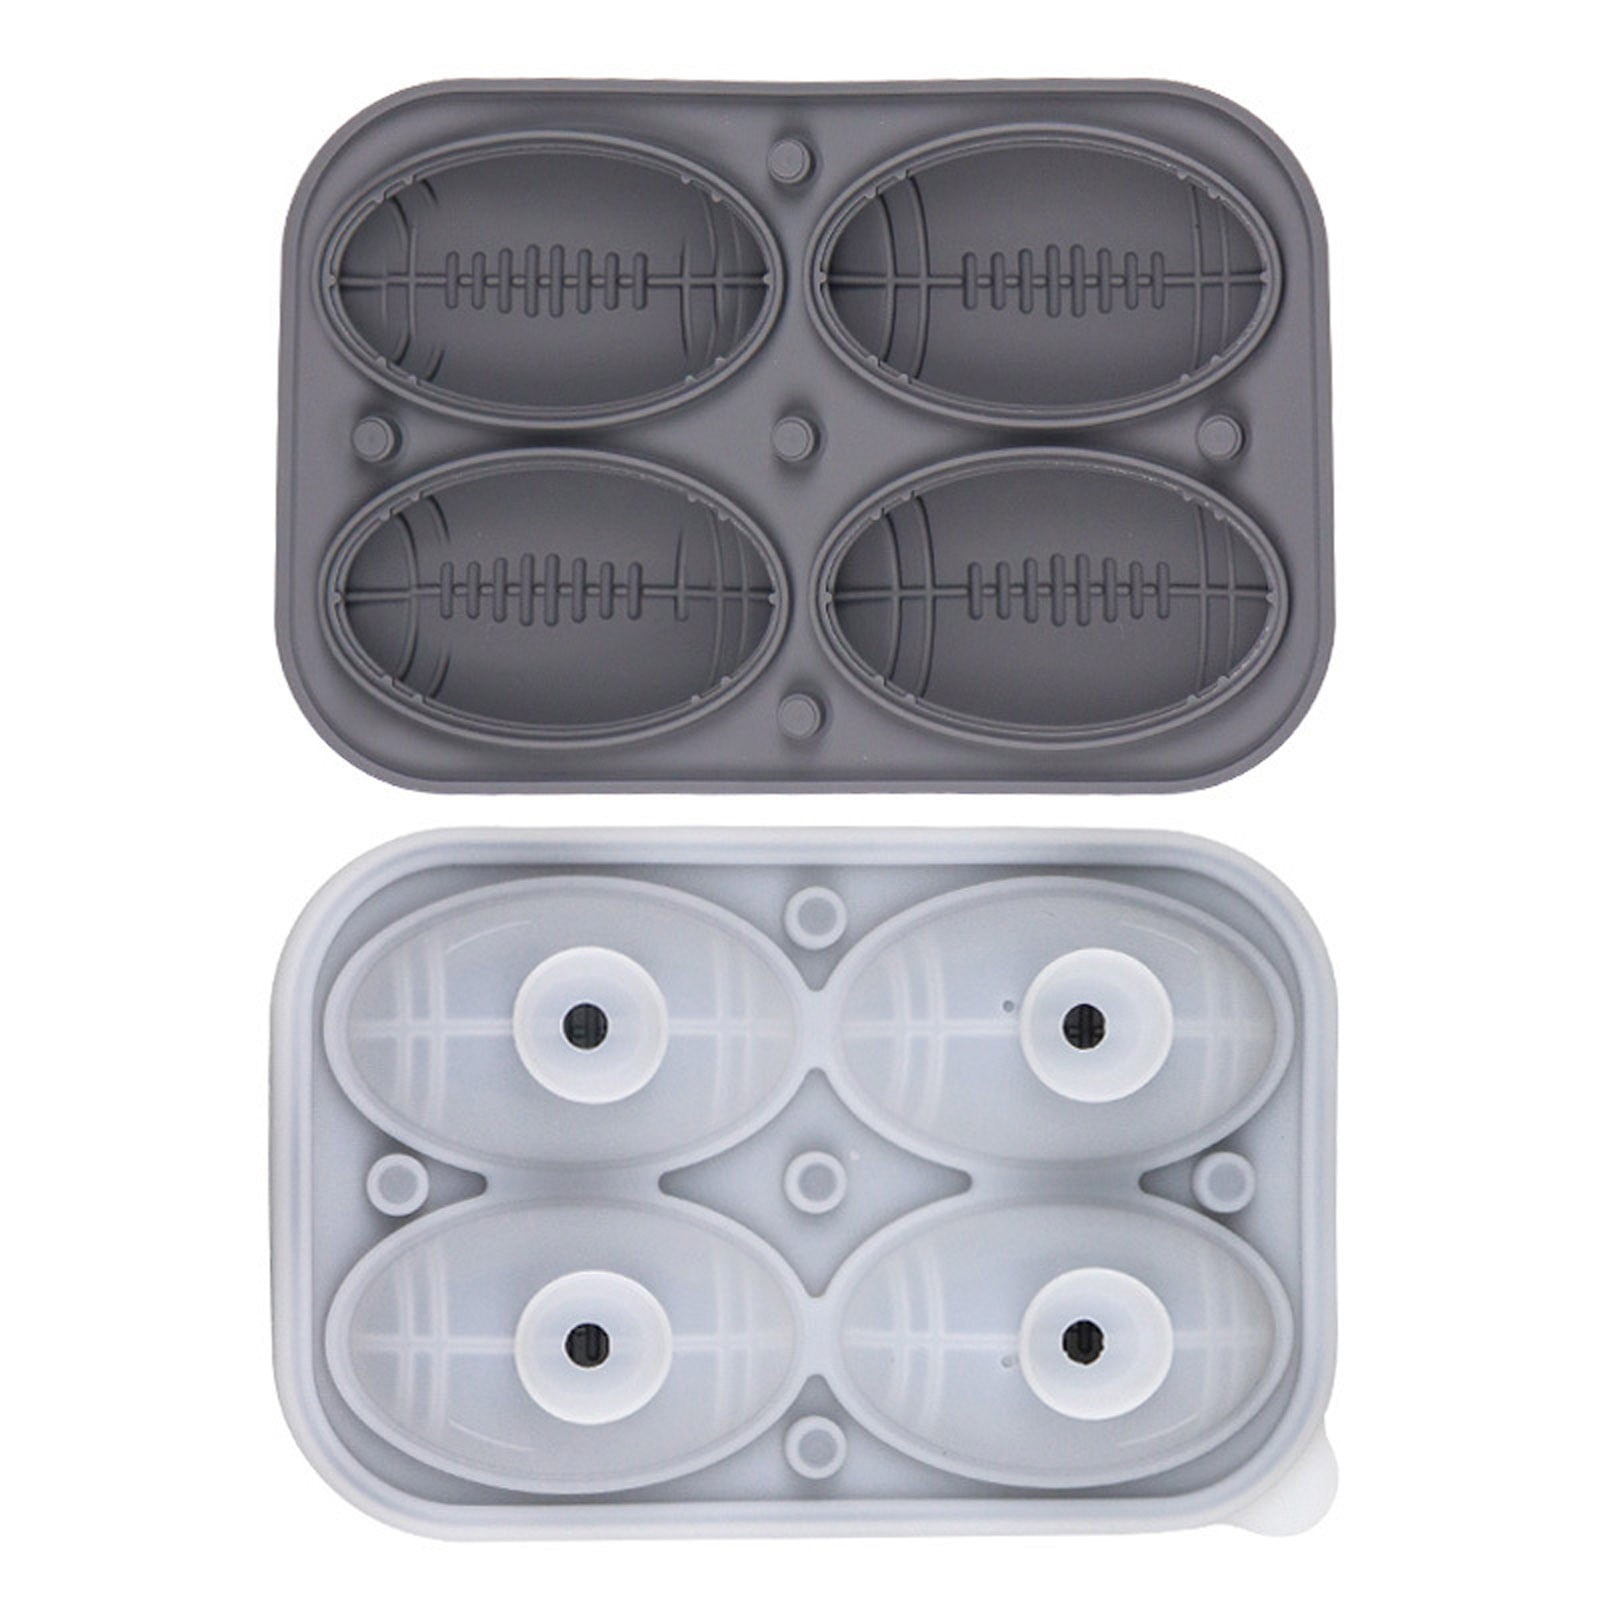 Vikakiooze Cute Ice Cube Tray 2023 New Ice Cubes Maker,Ice Cubes Molding  Ice Box Small Household Refrigerator Easy-Release Ice Lattice With Cover